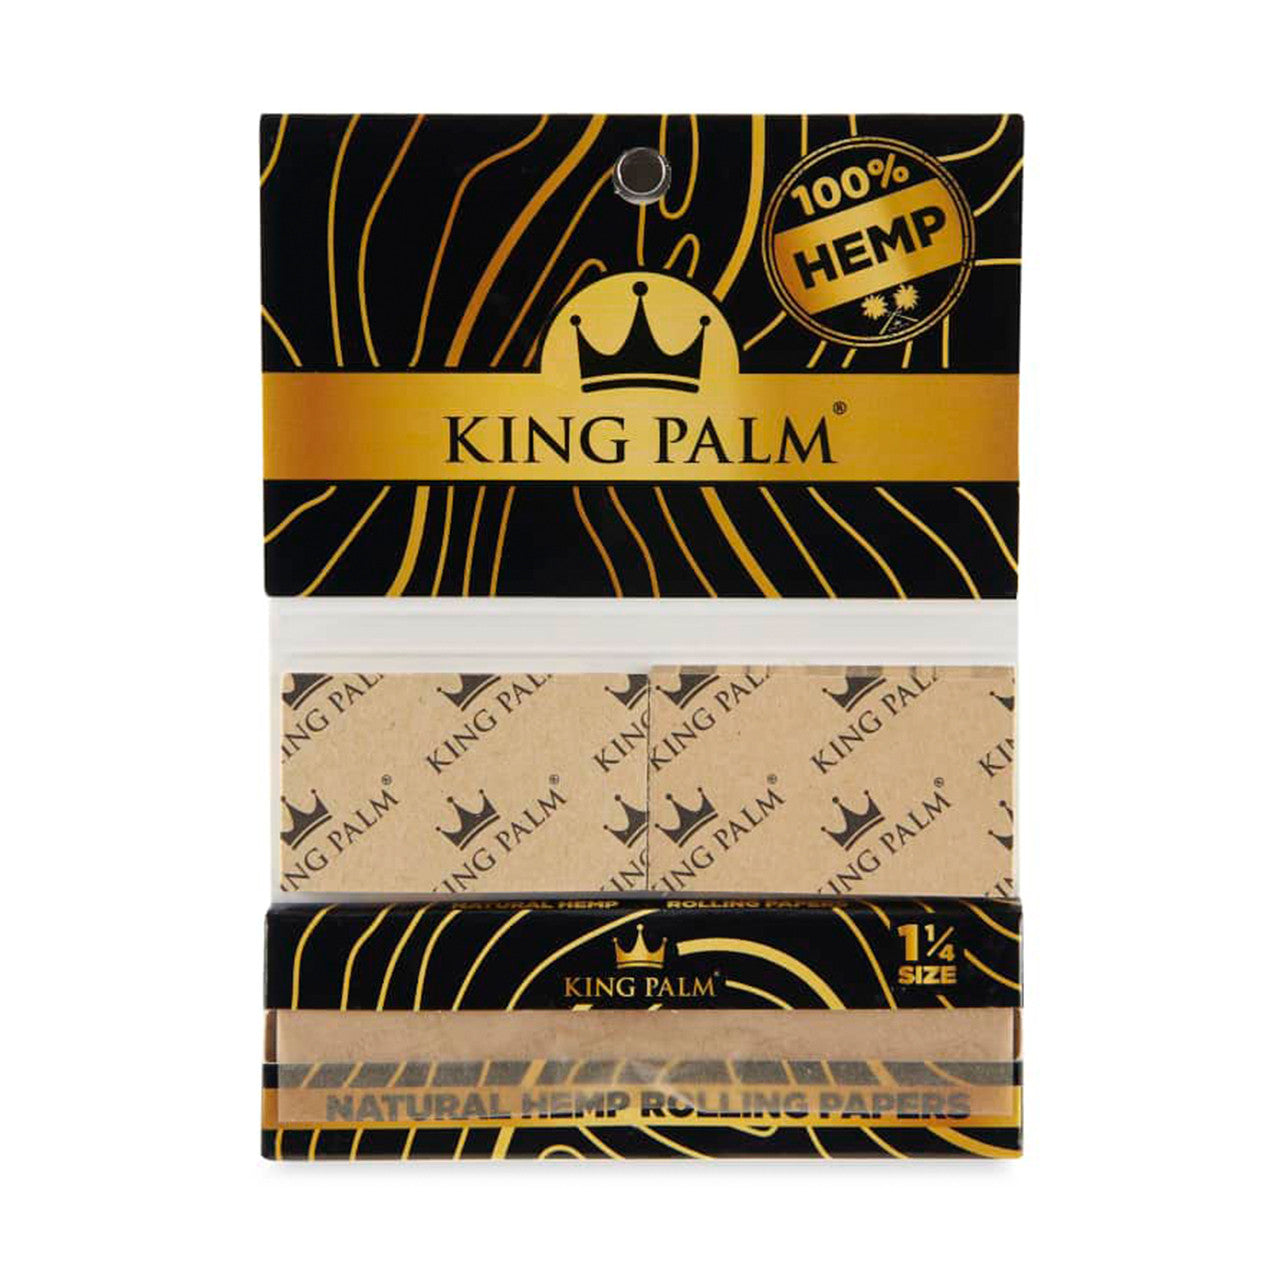 King Palm Natural Hemp Rolling Papers Booklet